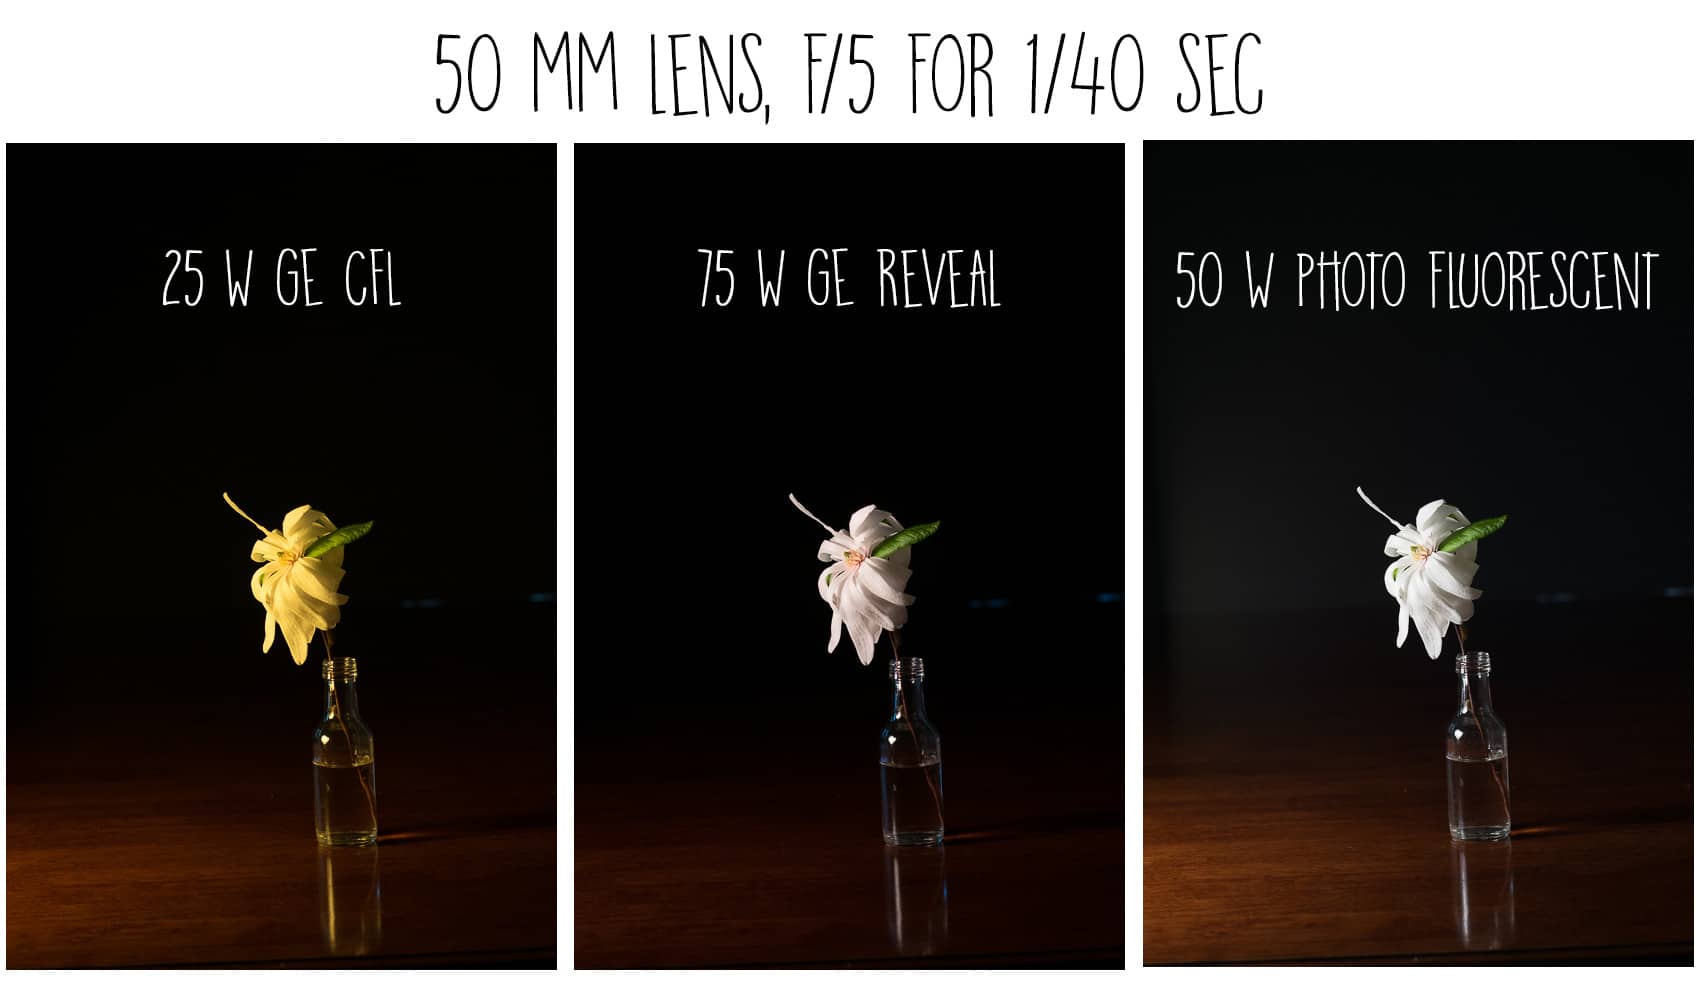 Quick tutorial on Floral Art Photography showing how to photograph against a black background with a comparison of the effects different bulbs. Great way to diy art for your home decor.